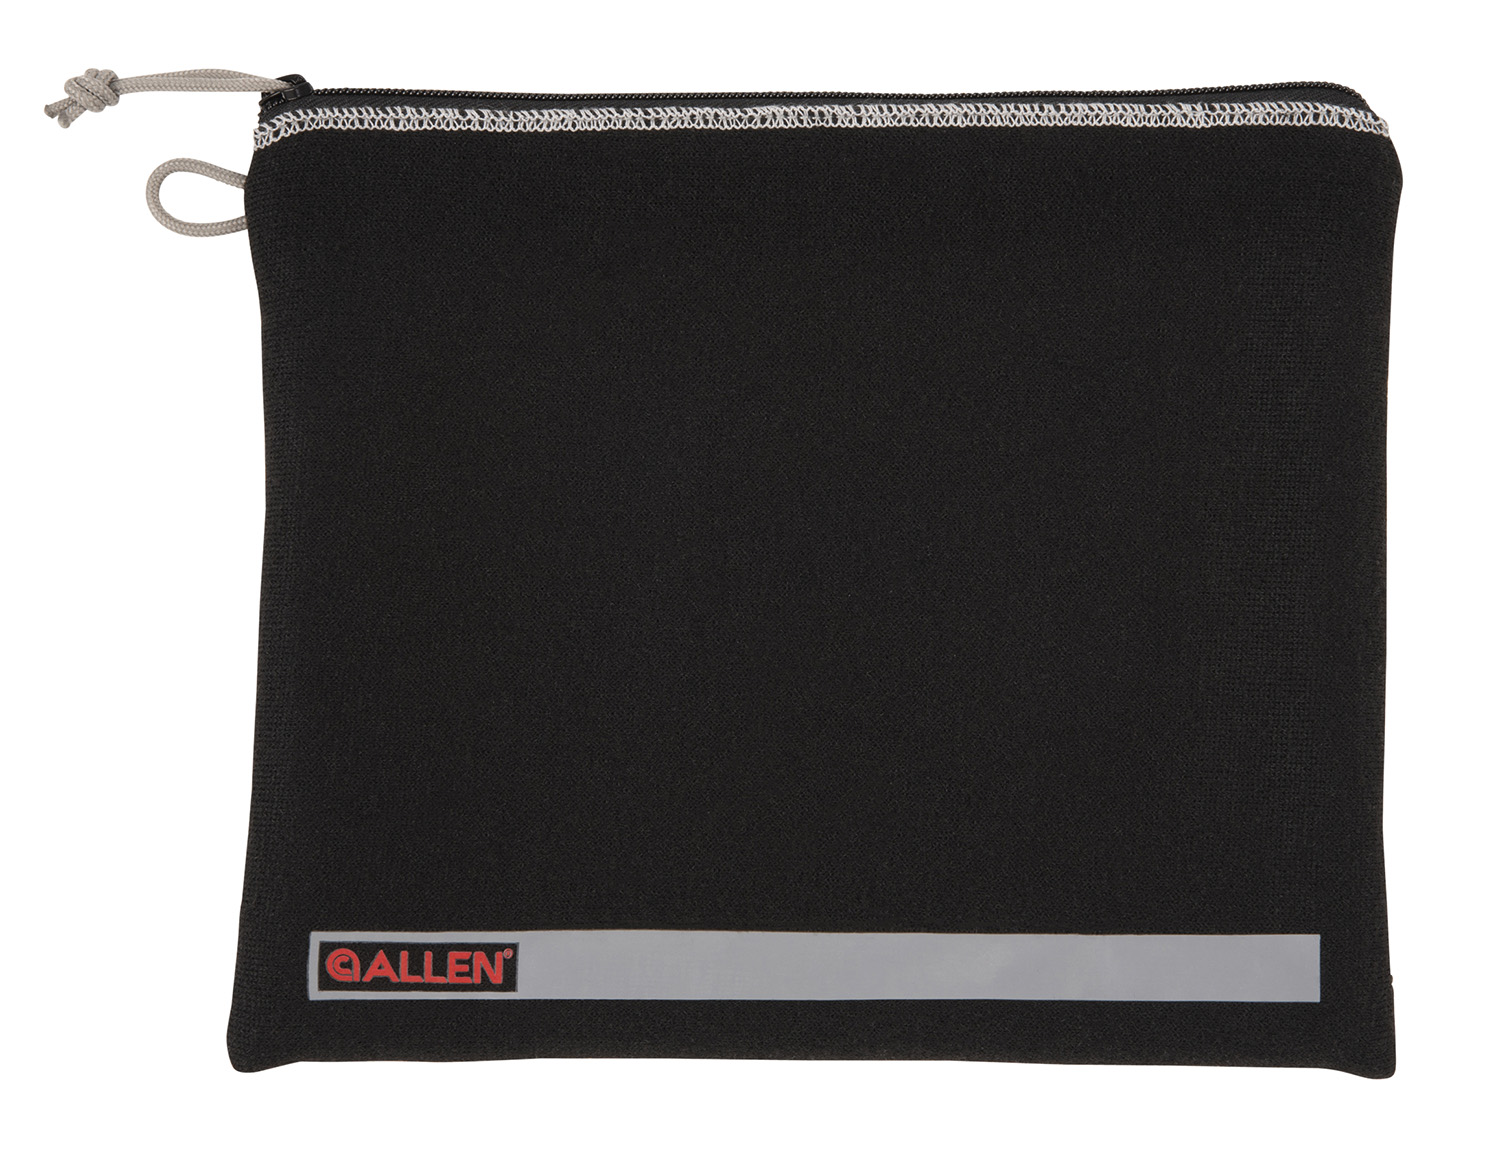 Allen 3630 Pistol Pouch  made of Black Polyester with Lockable Zippers, ID Label & Fleece Lining Holds Oversized Handgun 9